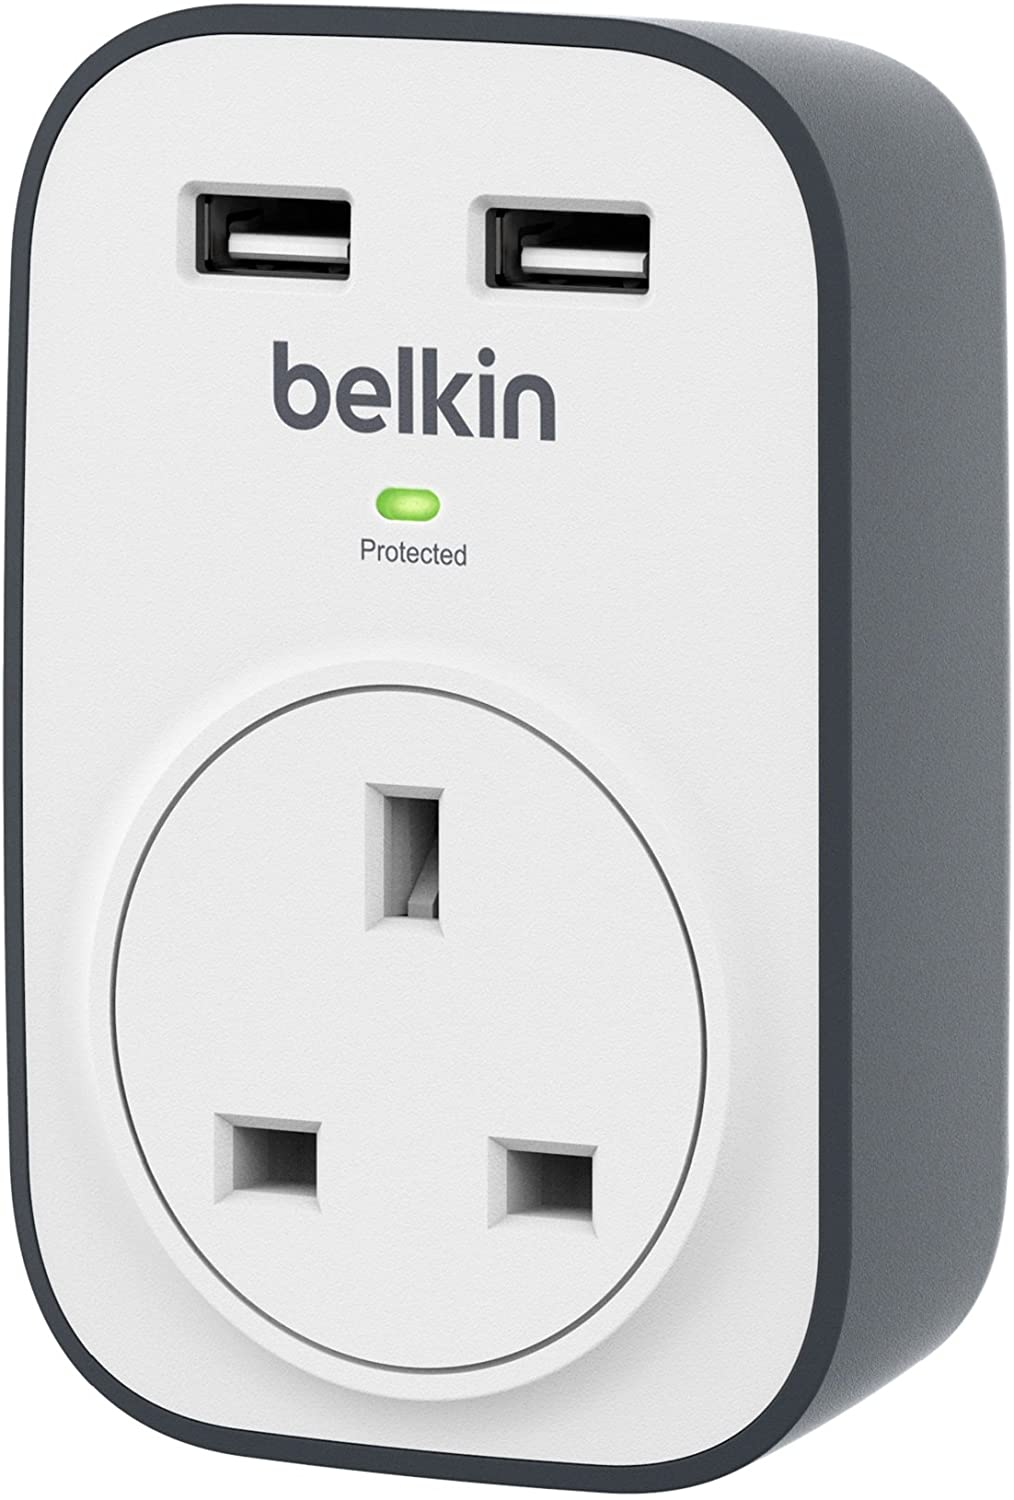 Belkin SurgeCube 1 Outlet Surge Protector with 2 x 2.4A Shared USB Charging - White (BSV103au), $1500 Connected Equipment Warranty, Damage-resistant